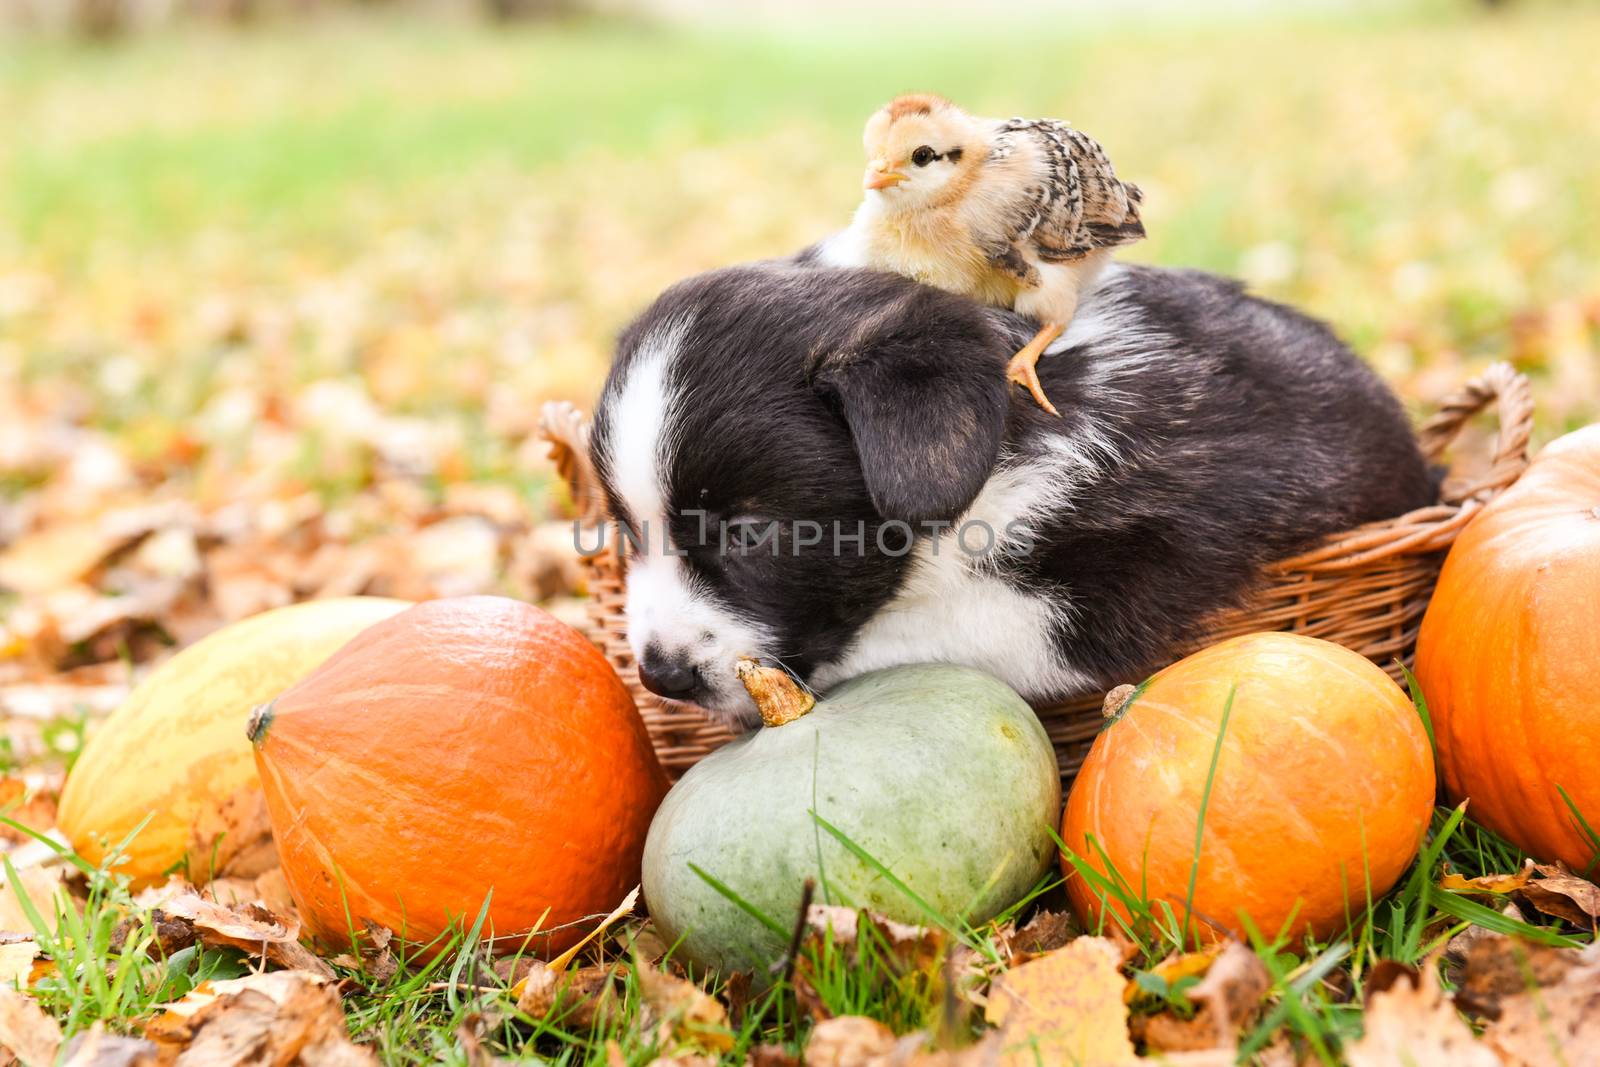 One corgi puppy dog with chicken and pumpkin in the basket on an autumn background